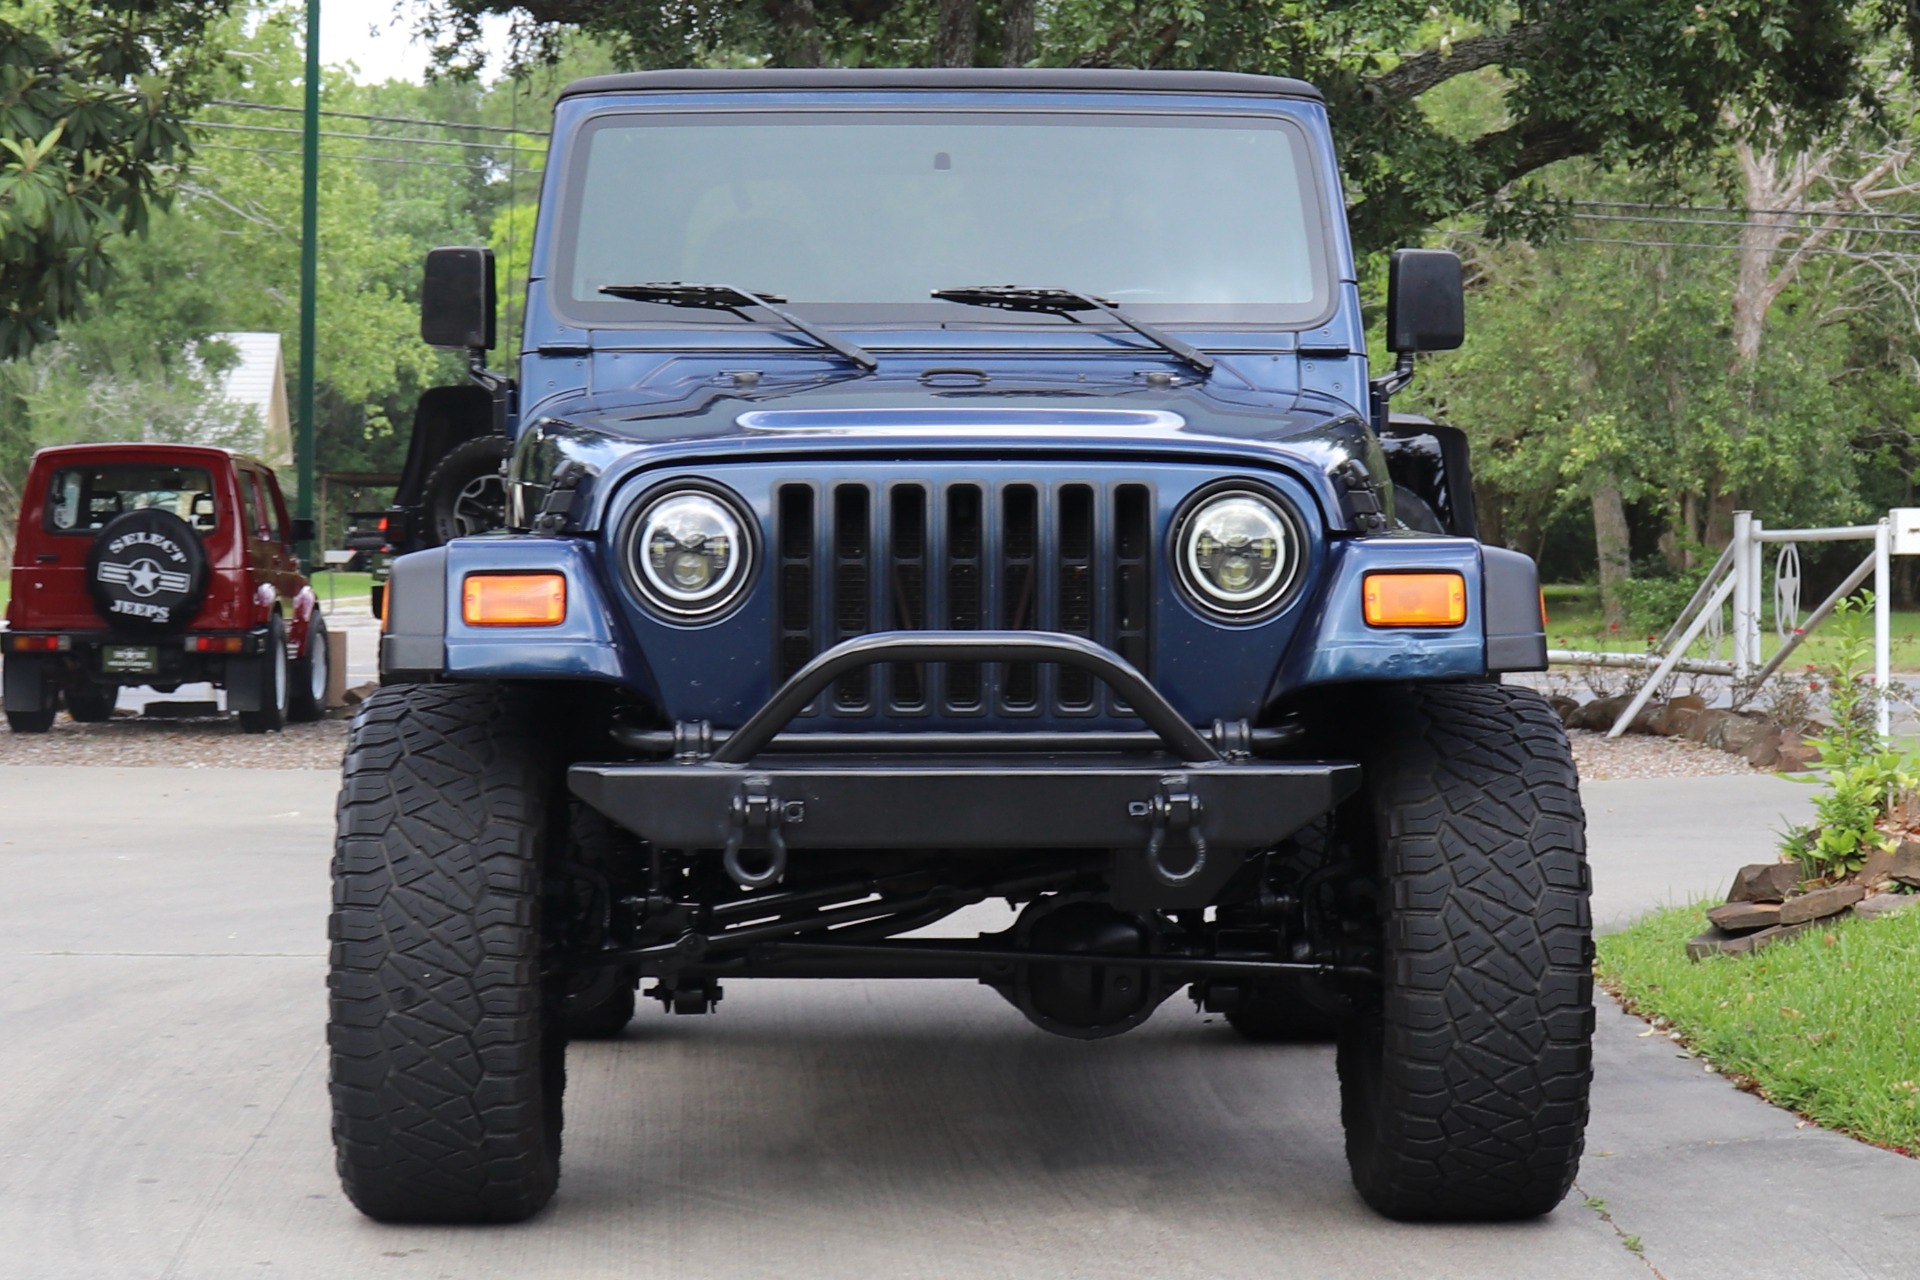 Used 2000 Jeep Wrangler Sport For Sale (Special Pricing) | Select Jeeps  Inc. Stock #777306